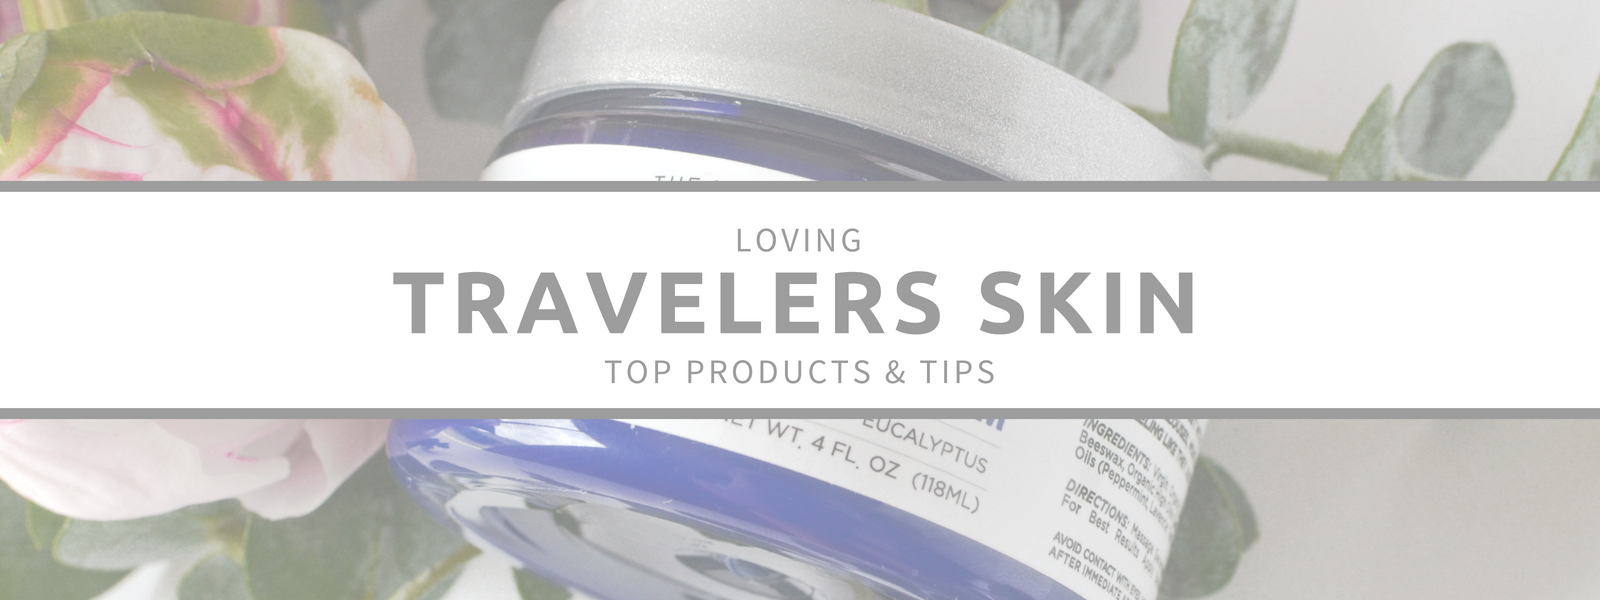 TRAVELER SKINCARE PRODUCTS